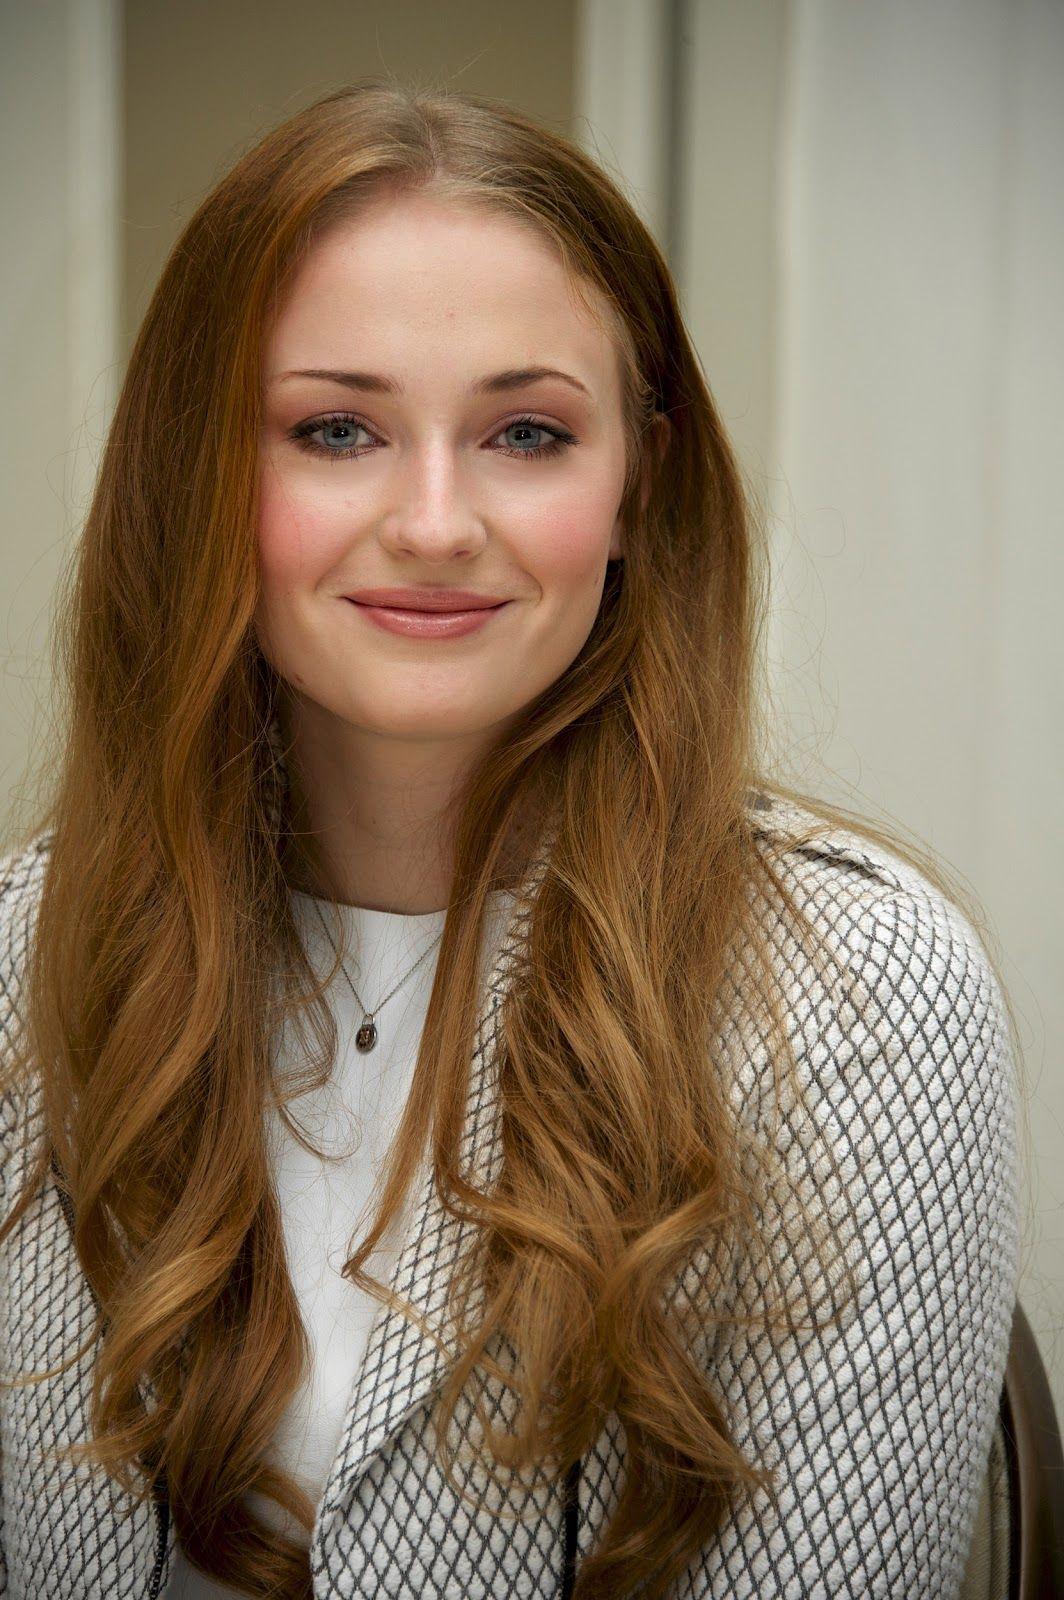 Game of Thrones' actress Sophie Turner Full HD Image & Wallpaper